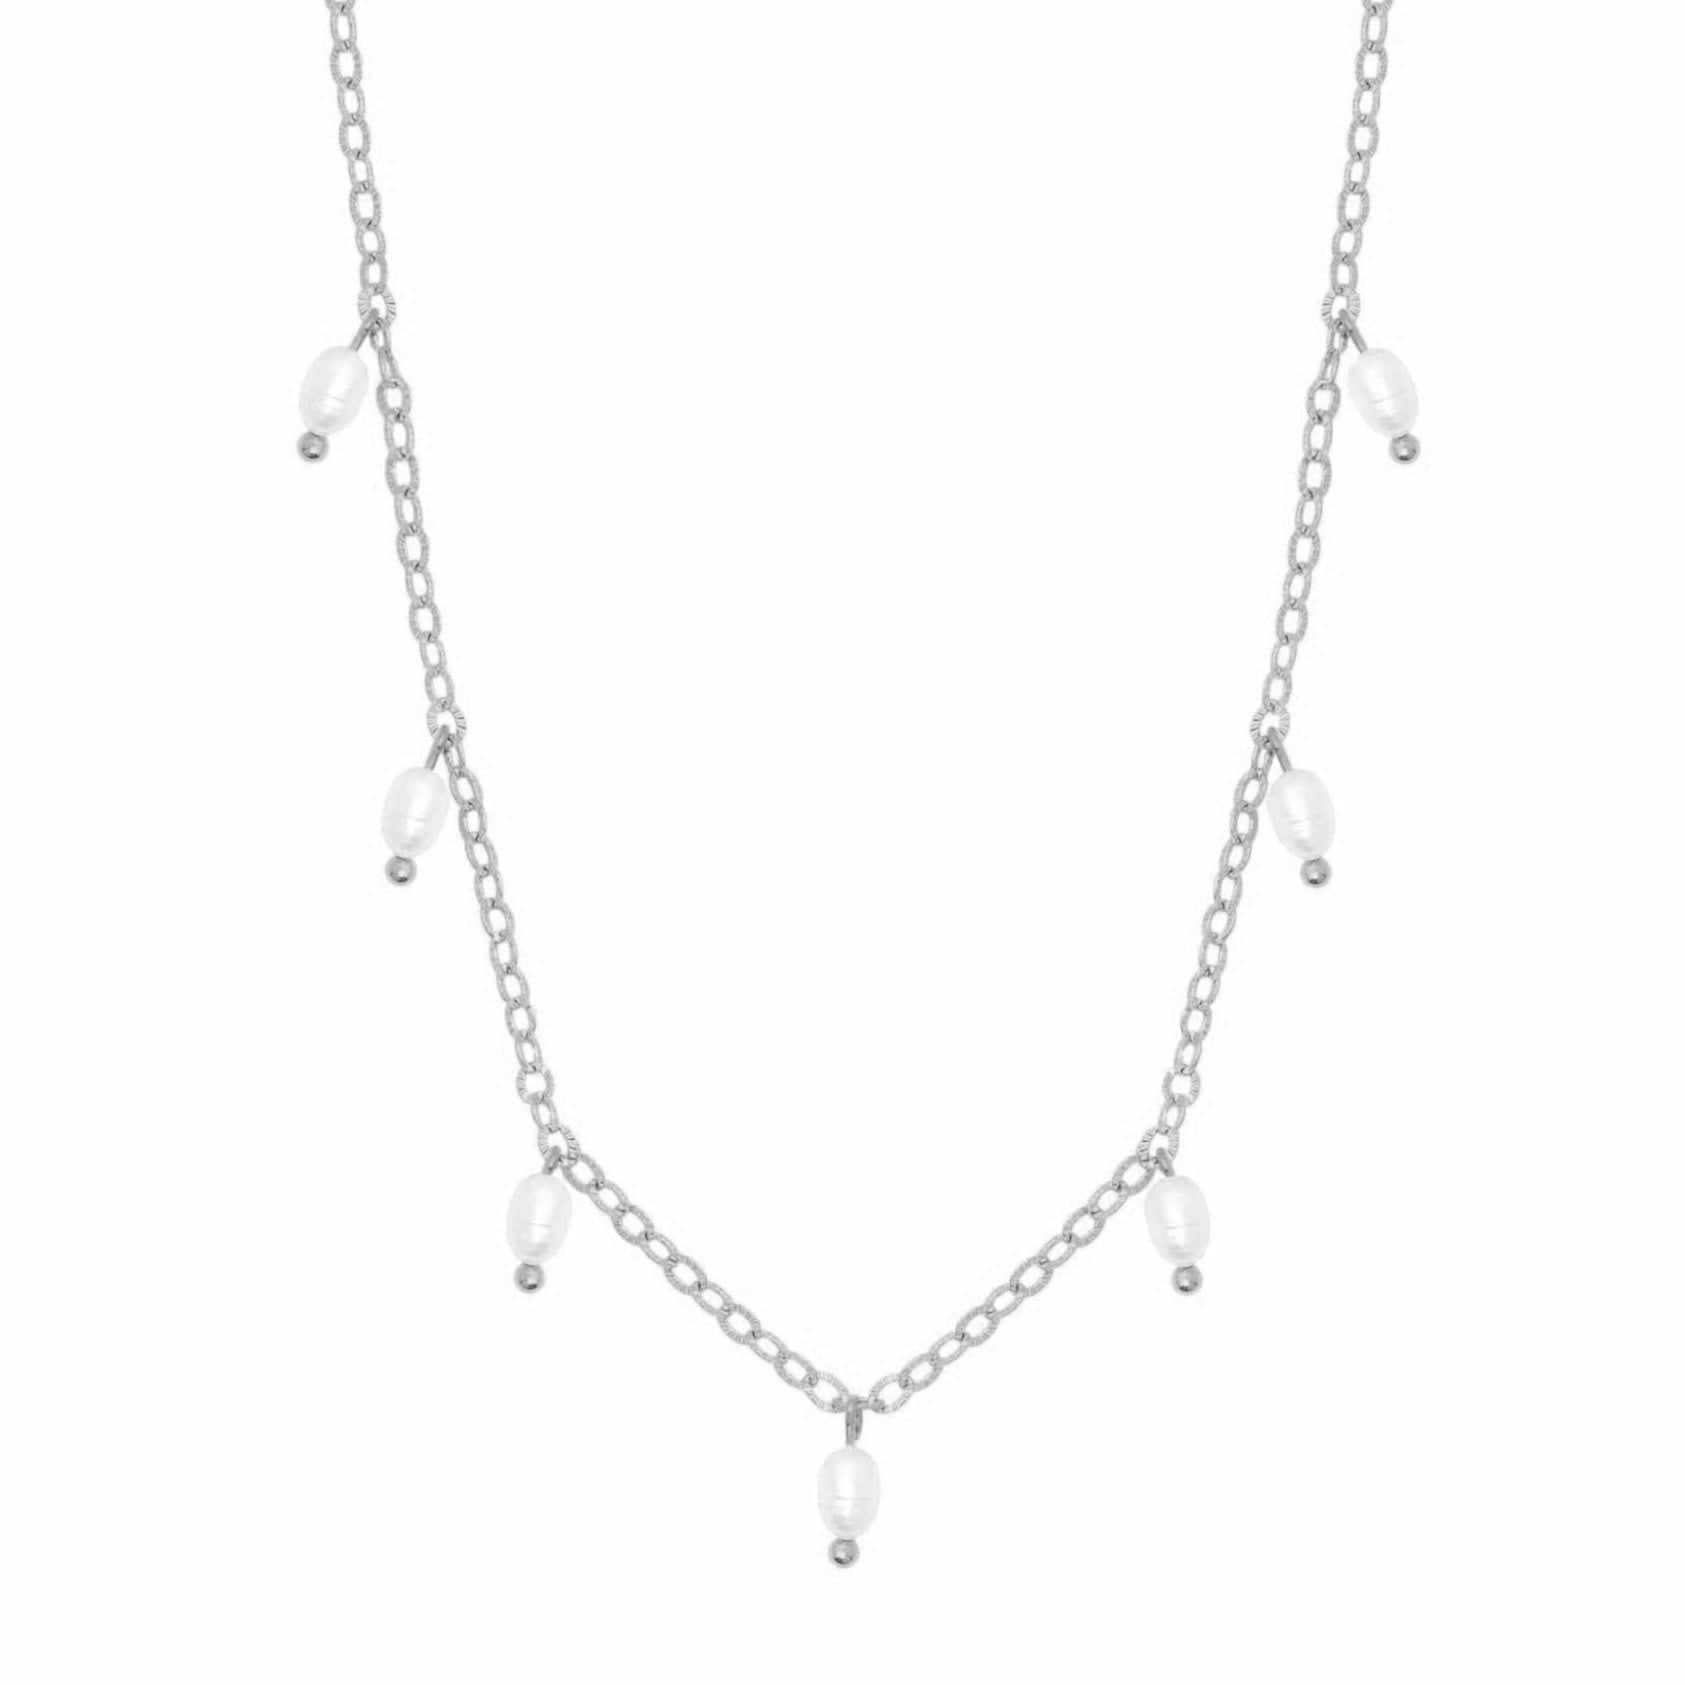 BohoMoon Stainless Steel Milly Pearl Necklace Silver